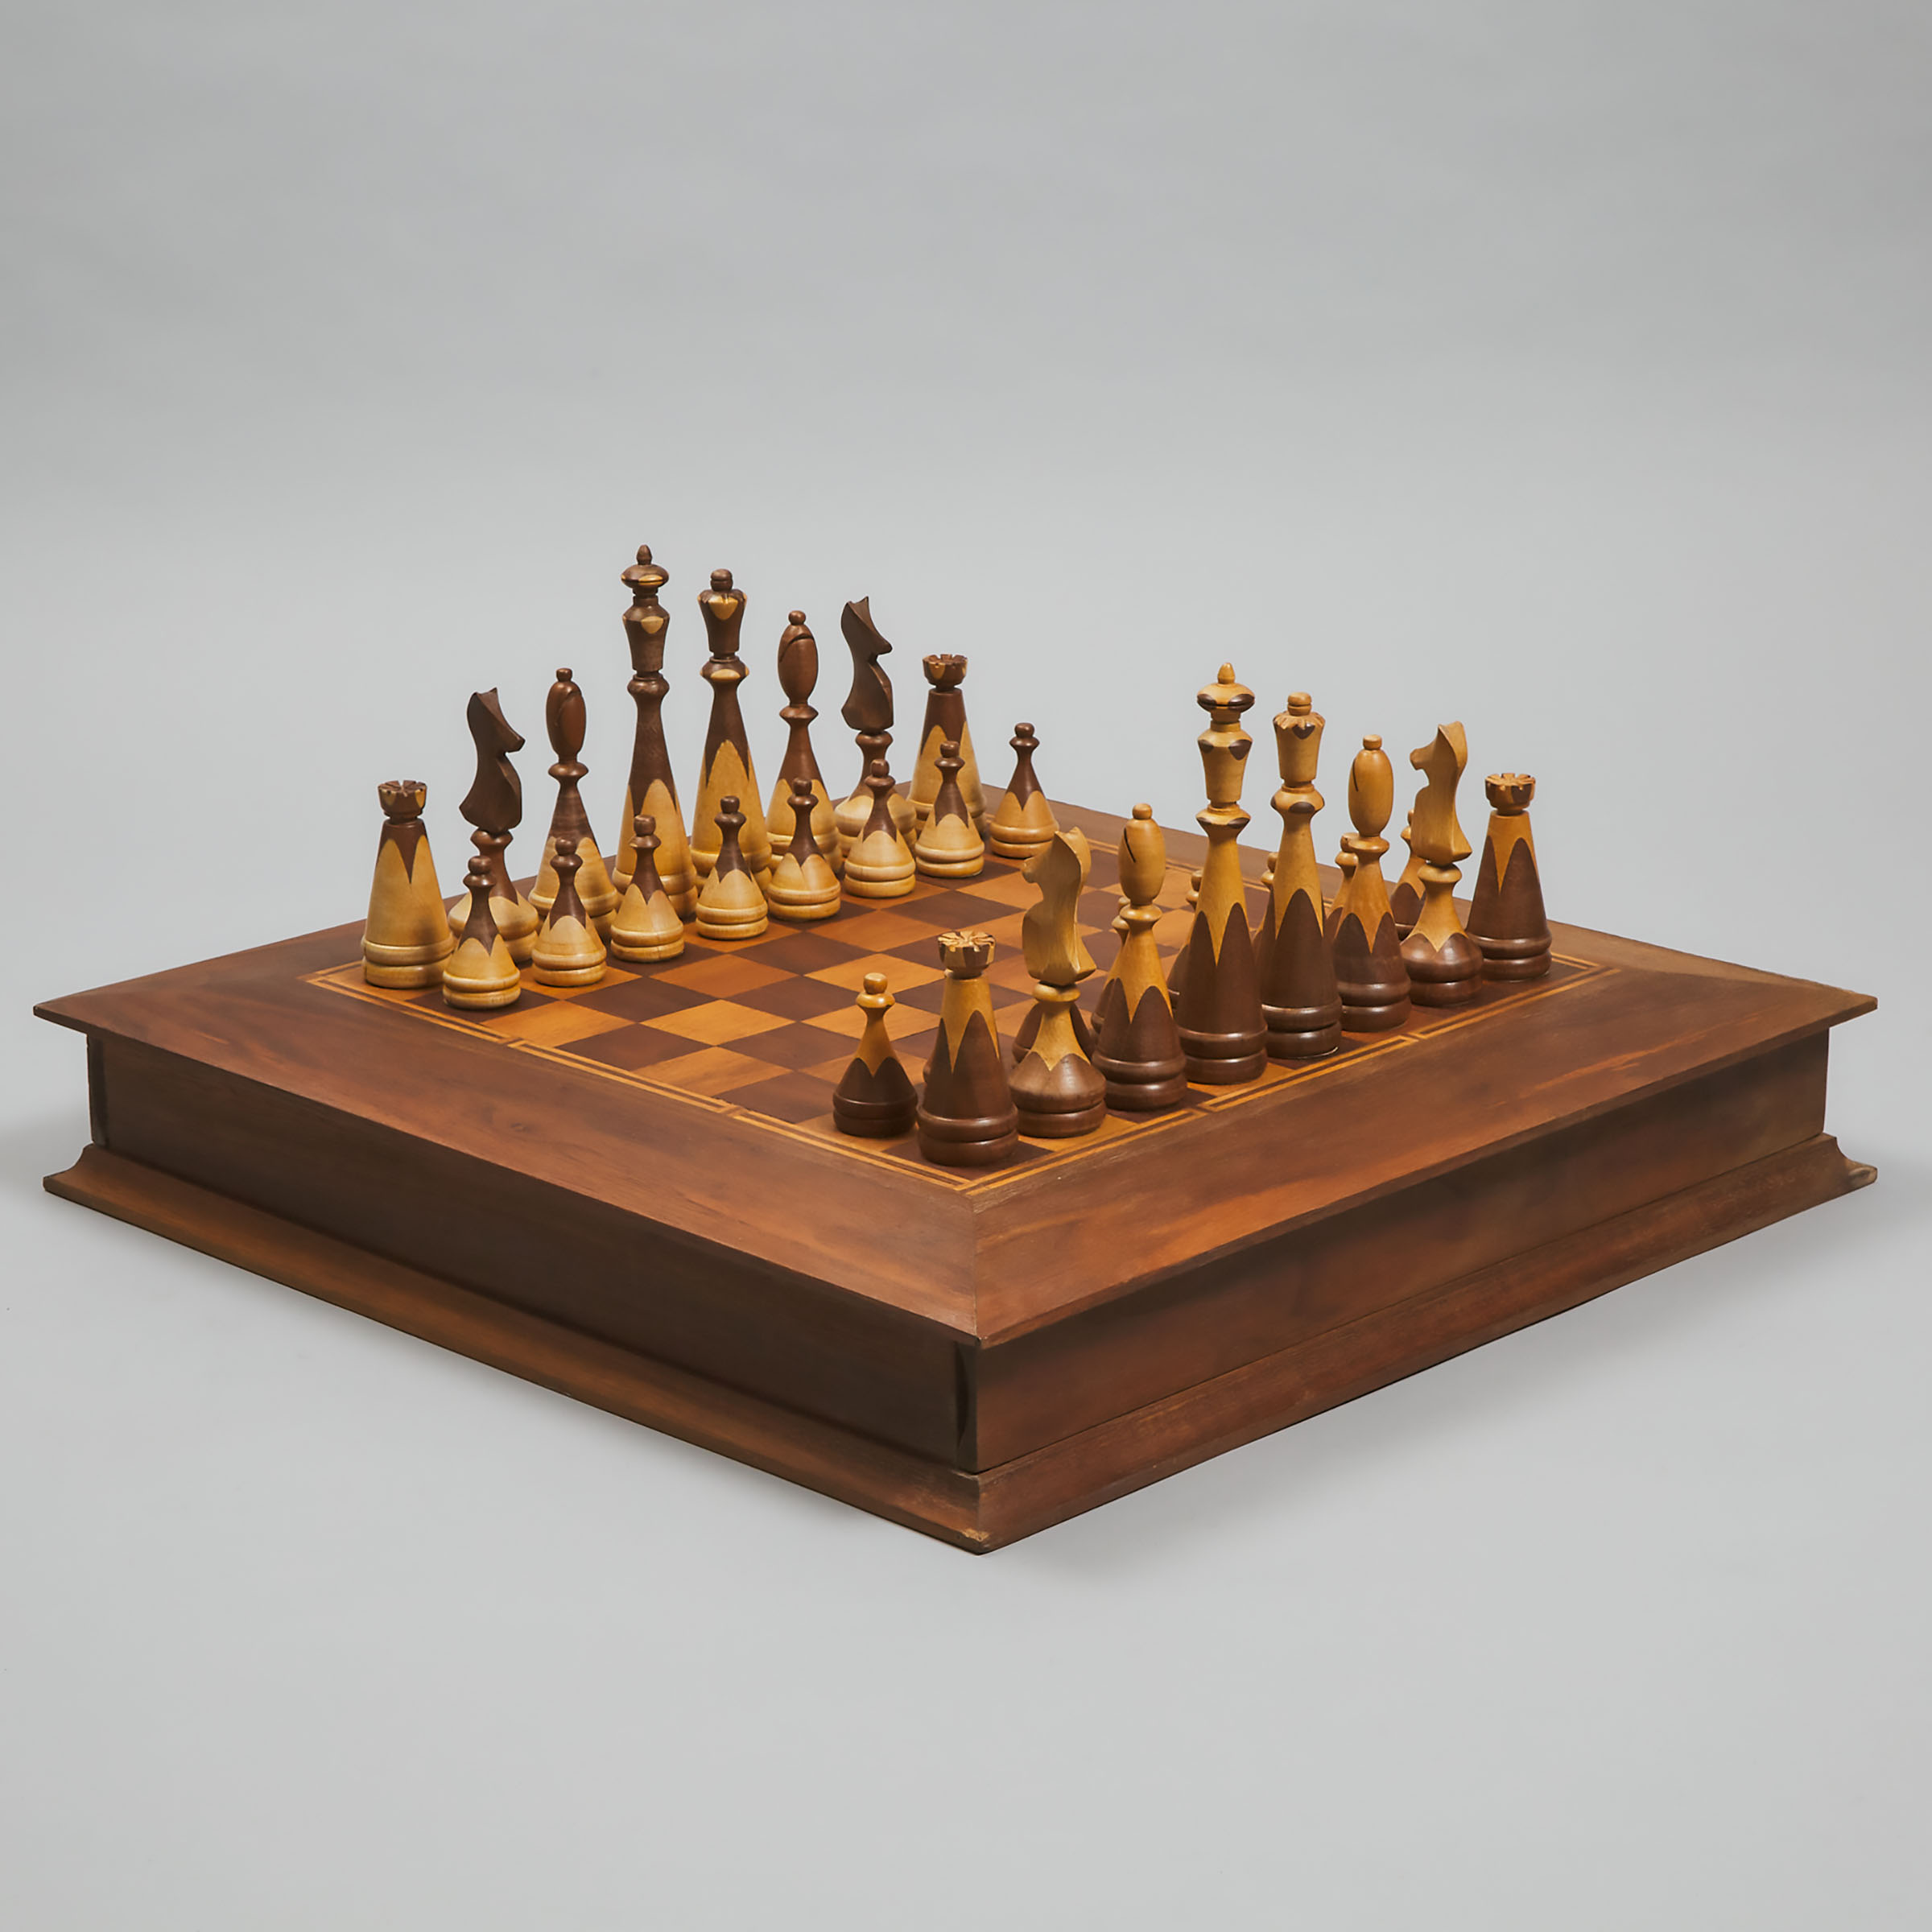 Canadian Woodworking Studio Mahogany and Walnut Chess Set and Board, c.2000